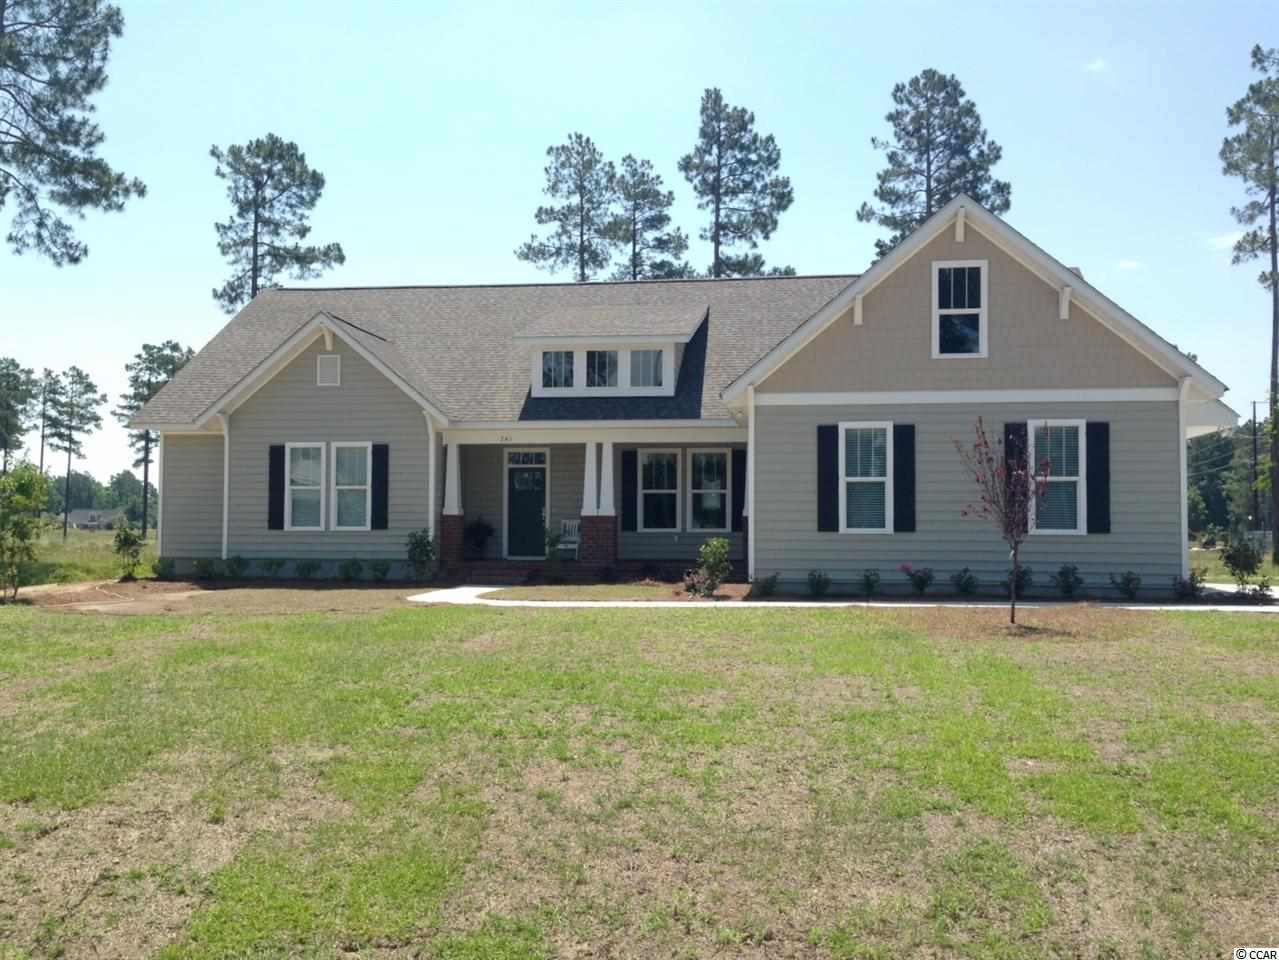 Lot 29 Stonehinge Dr. Conway, SC 29526